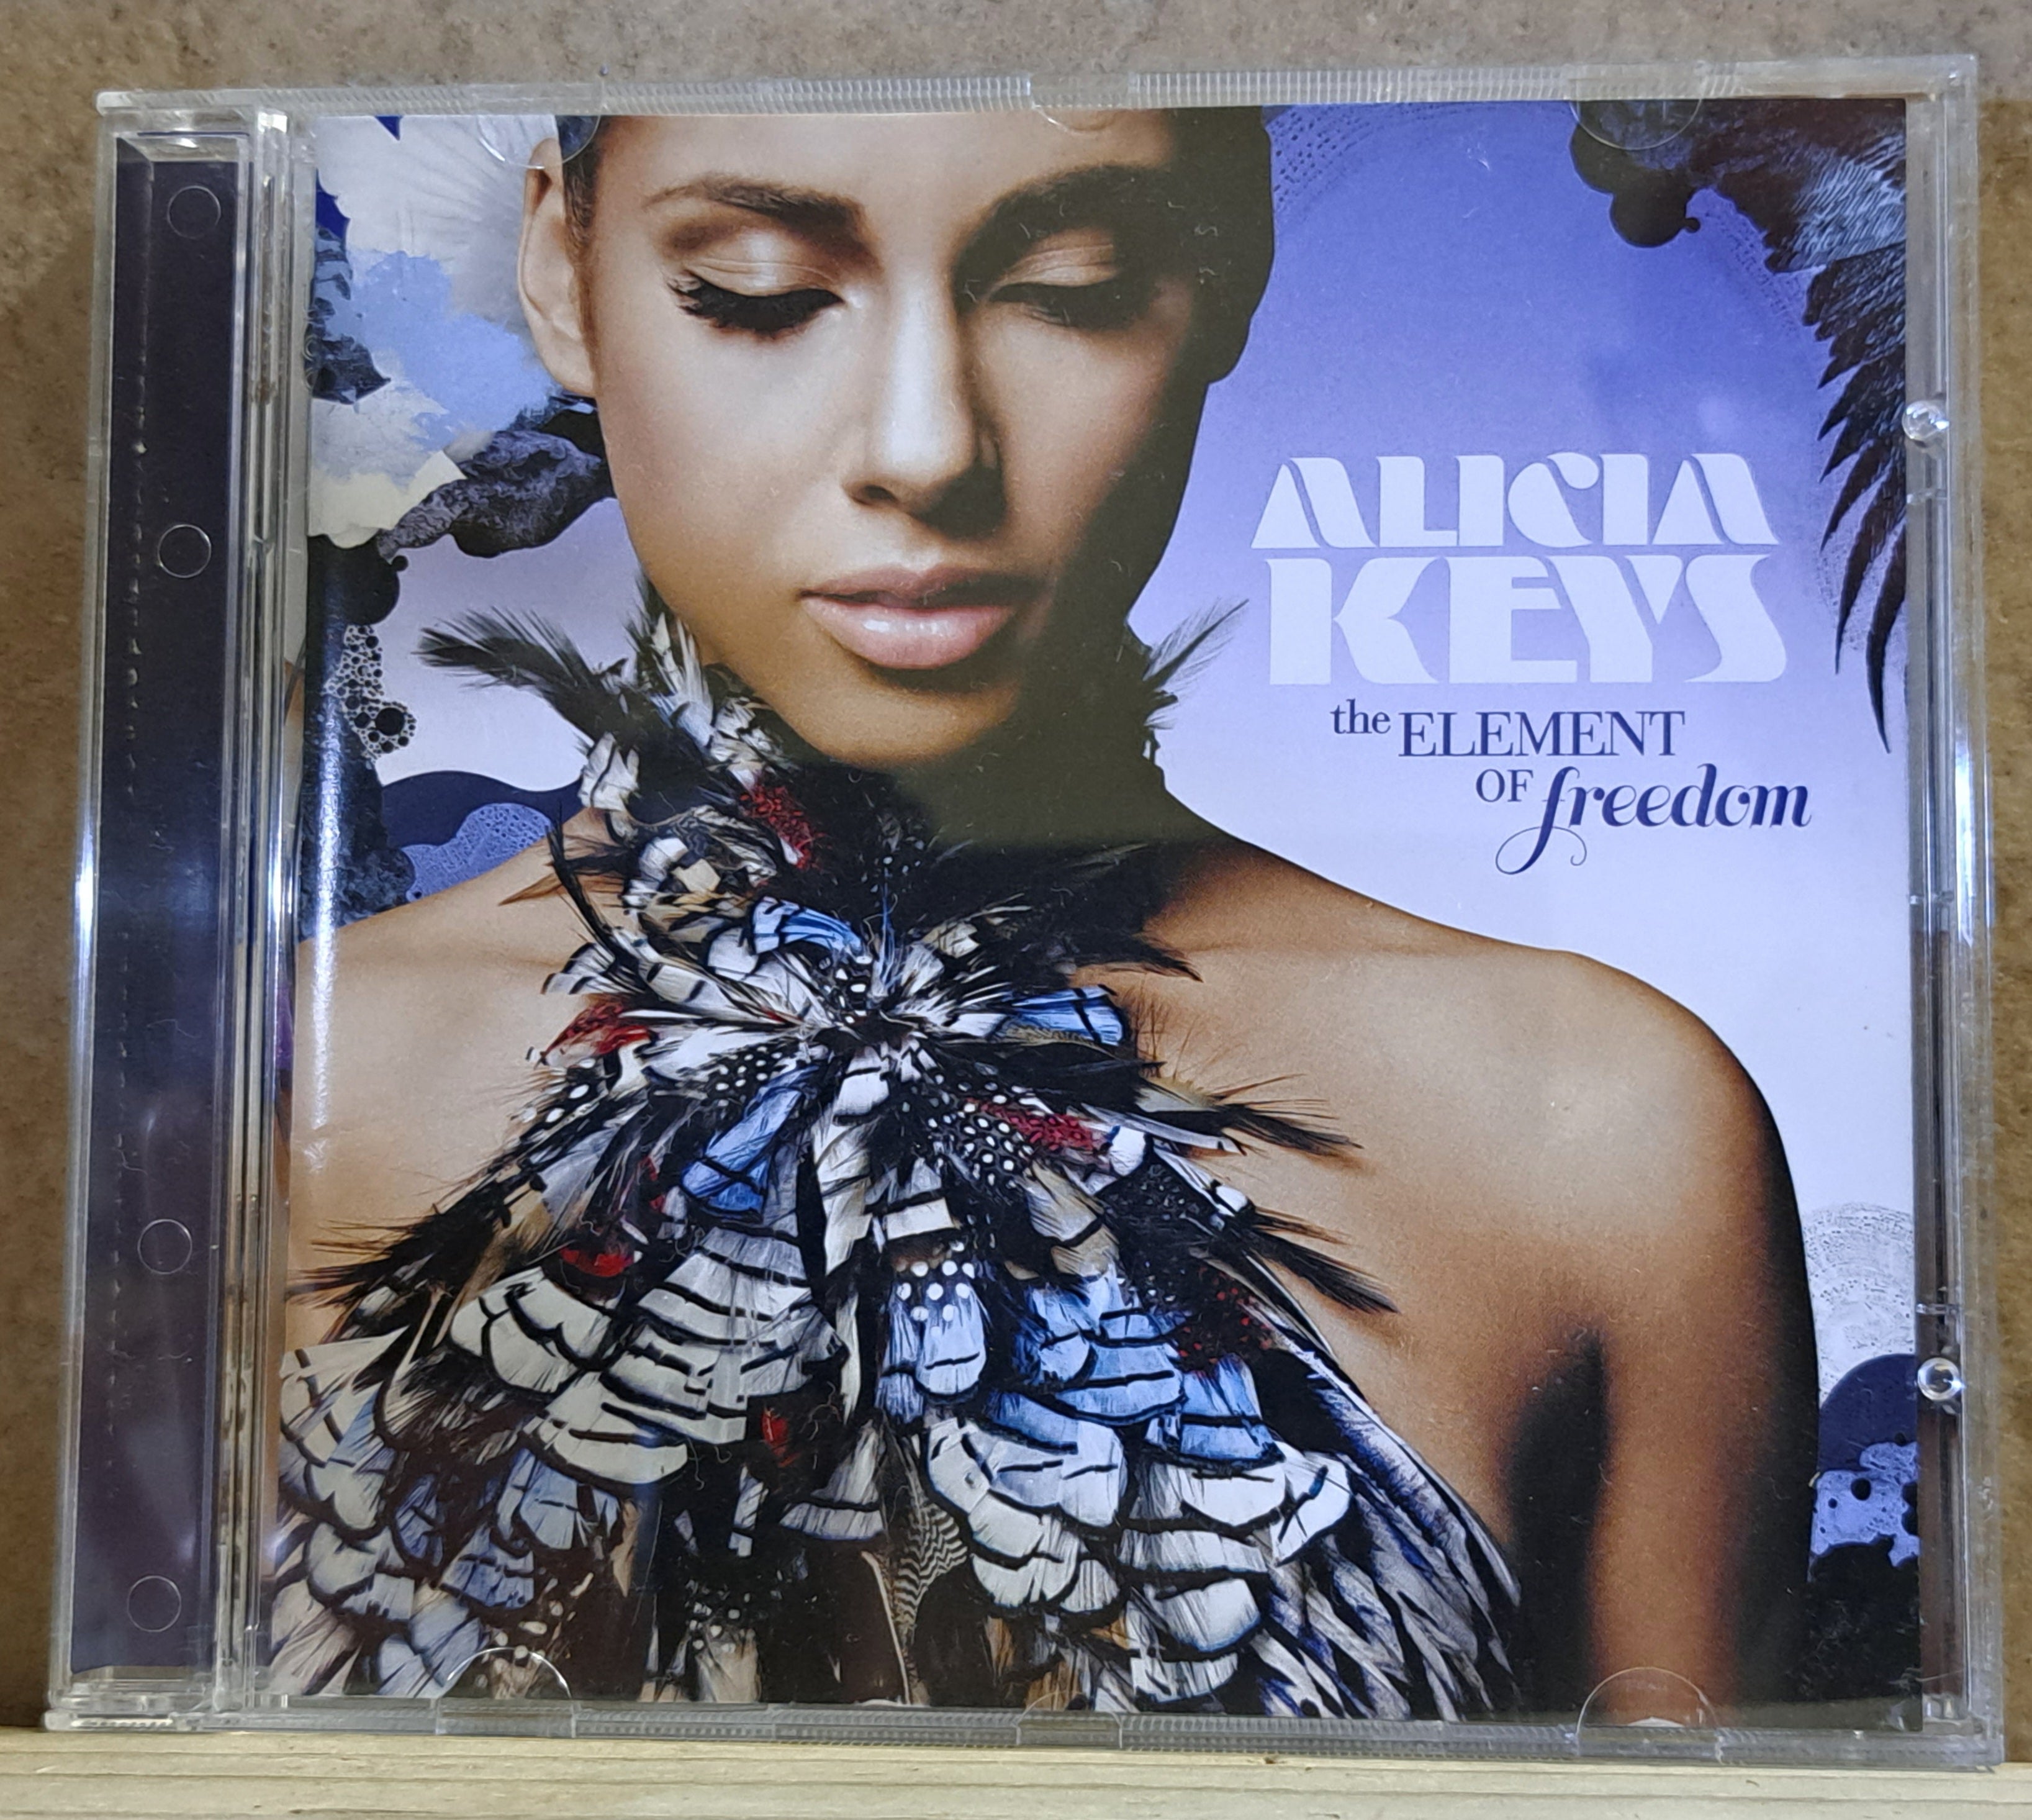 Alicia Keys - The element of freedom (cd)